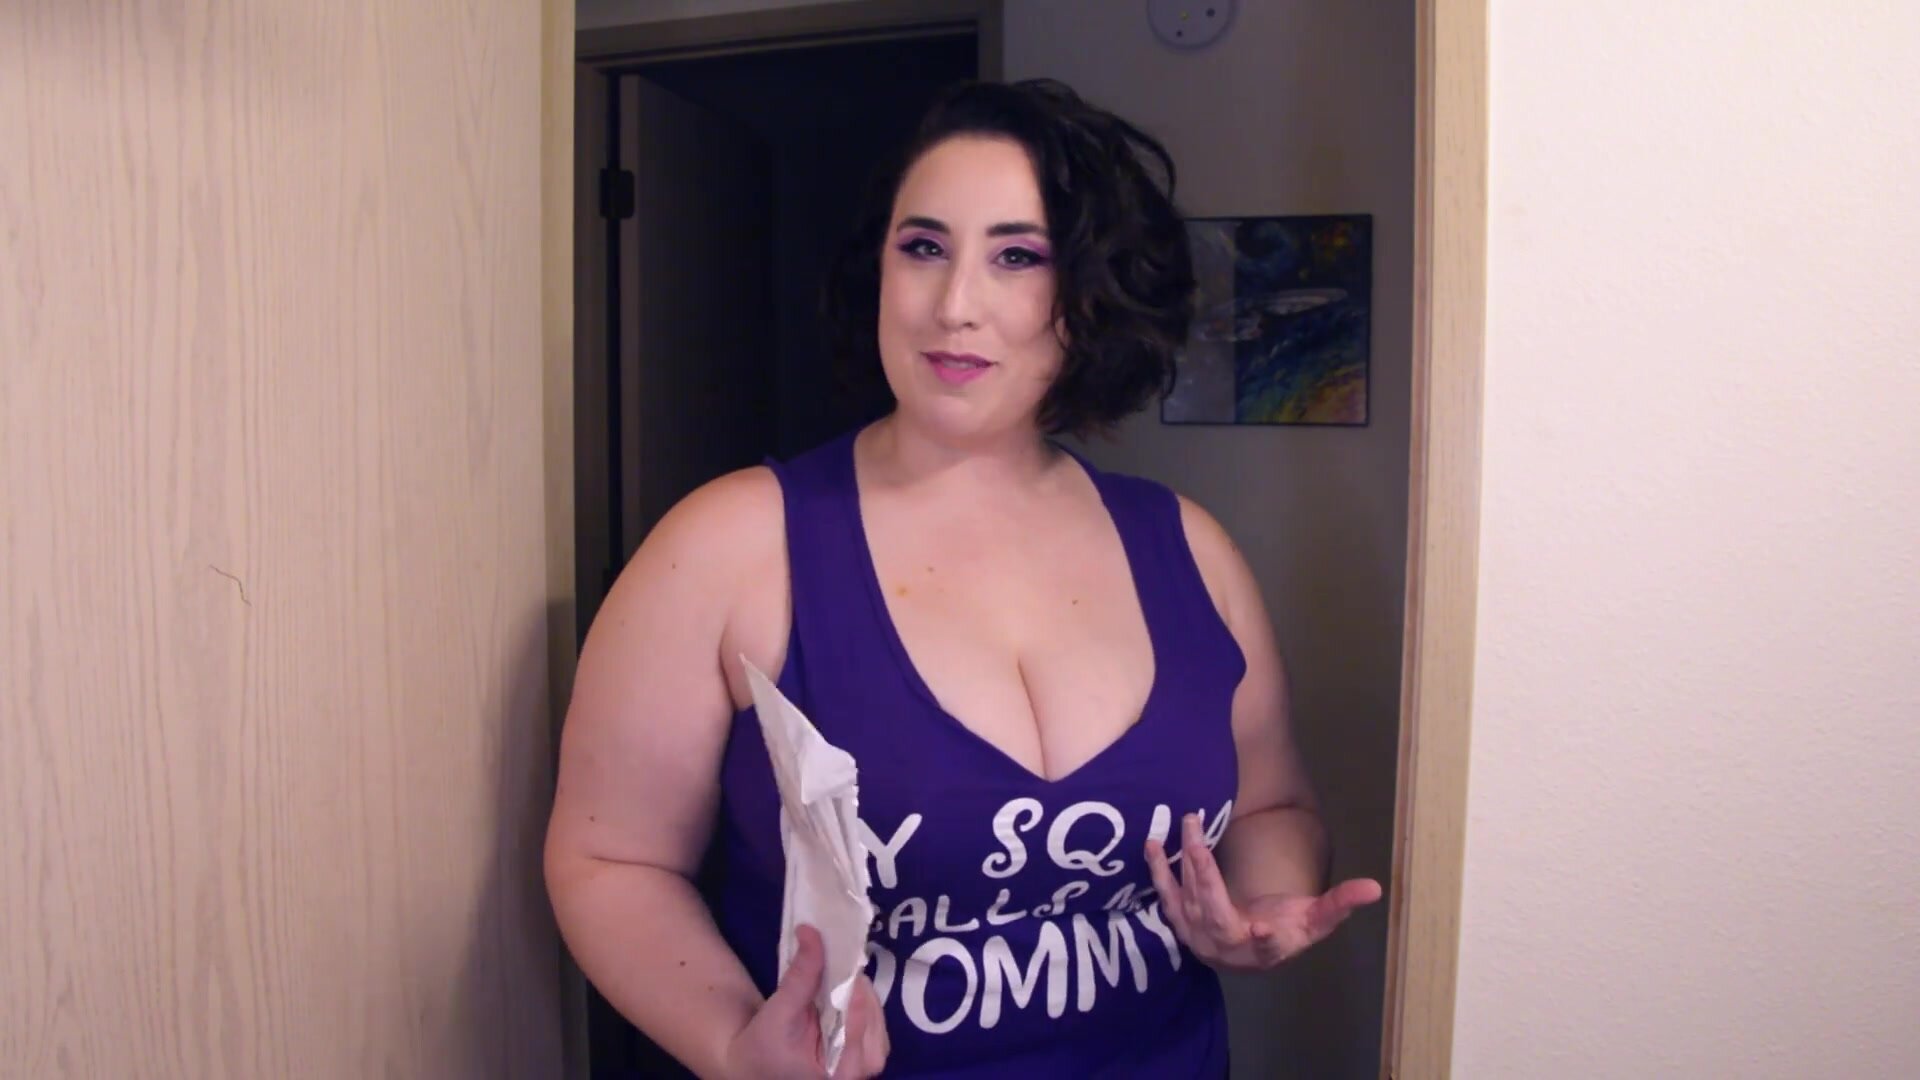 KL - mommy helps with your milf addiction